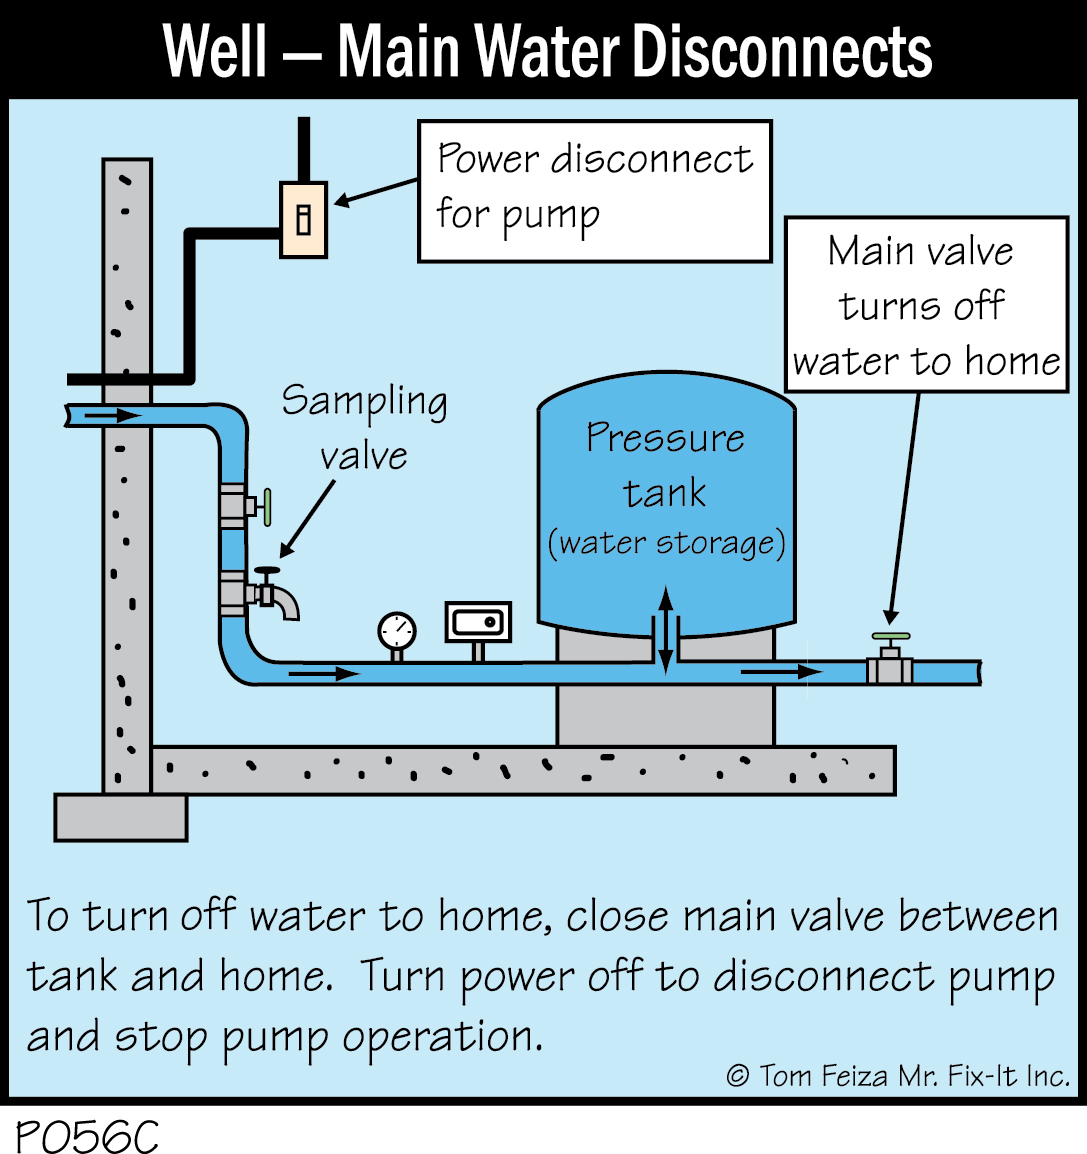 P056C - Well - Main Water Disconnects